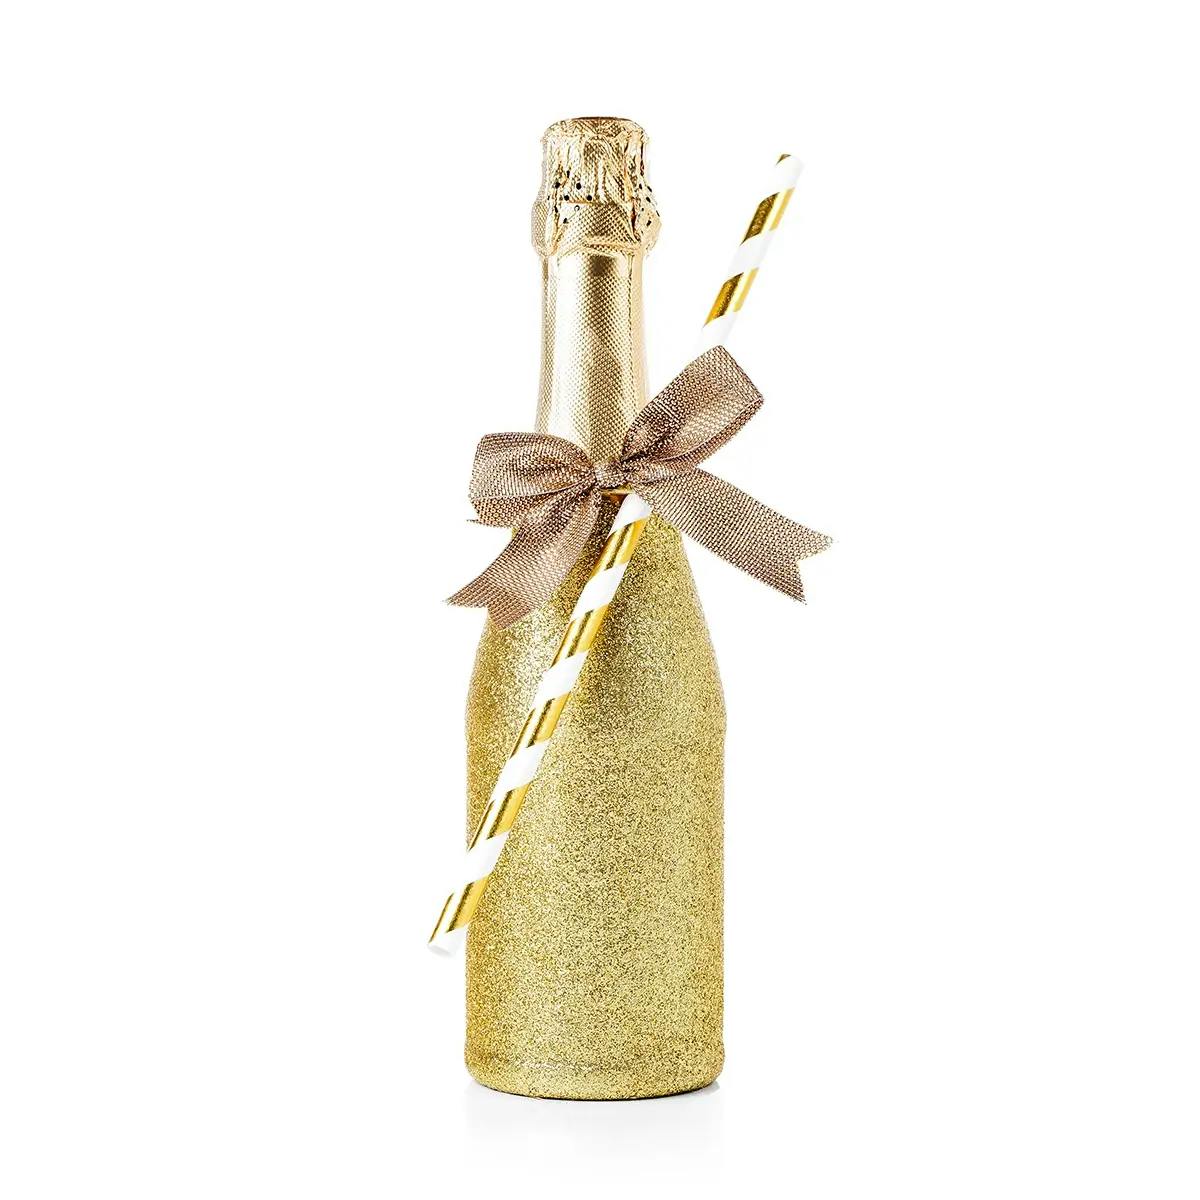 A wine bottle dipped in glitter and tied with ribbon.